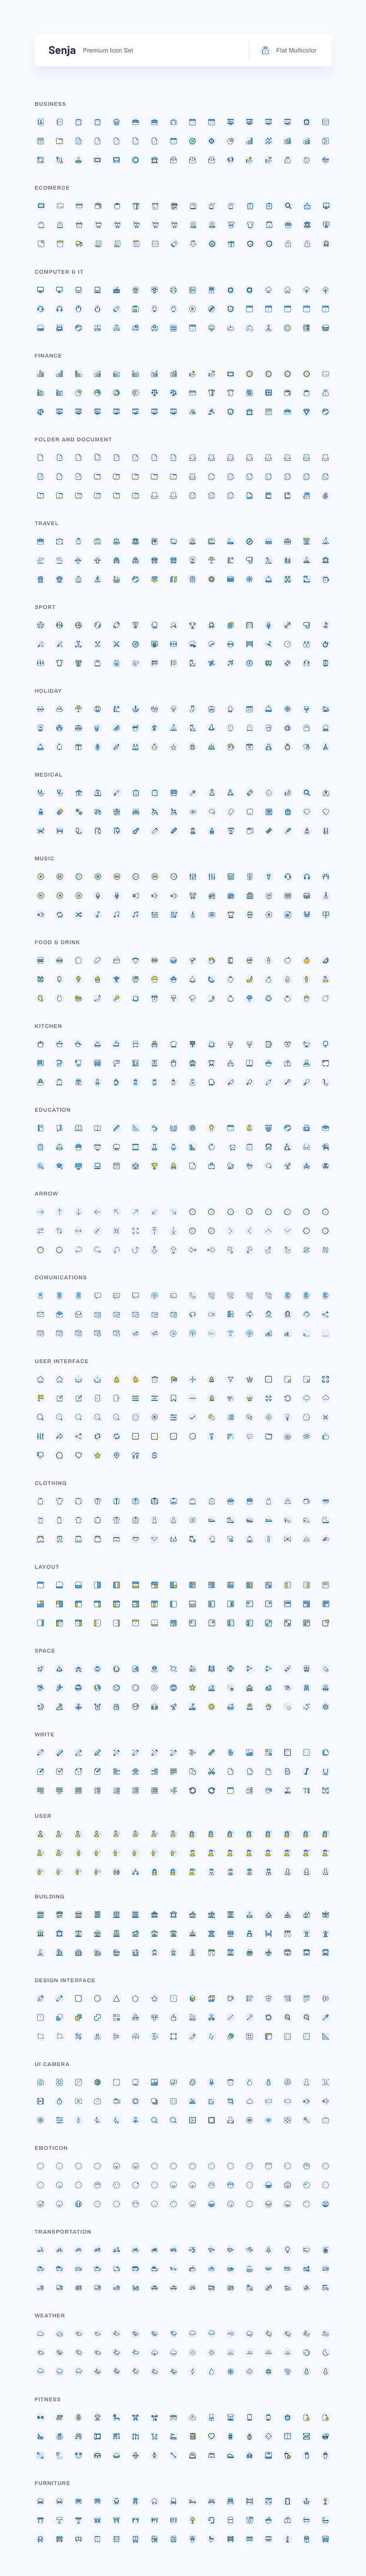 Senja : Icons for Every Need in UI Icons - product preview 9